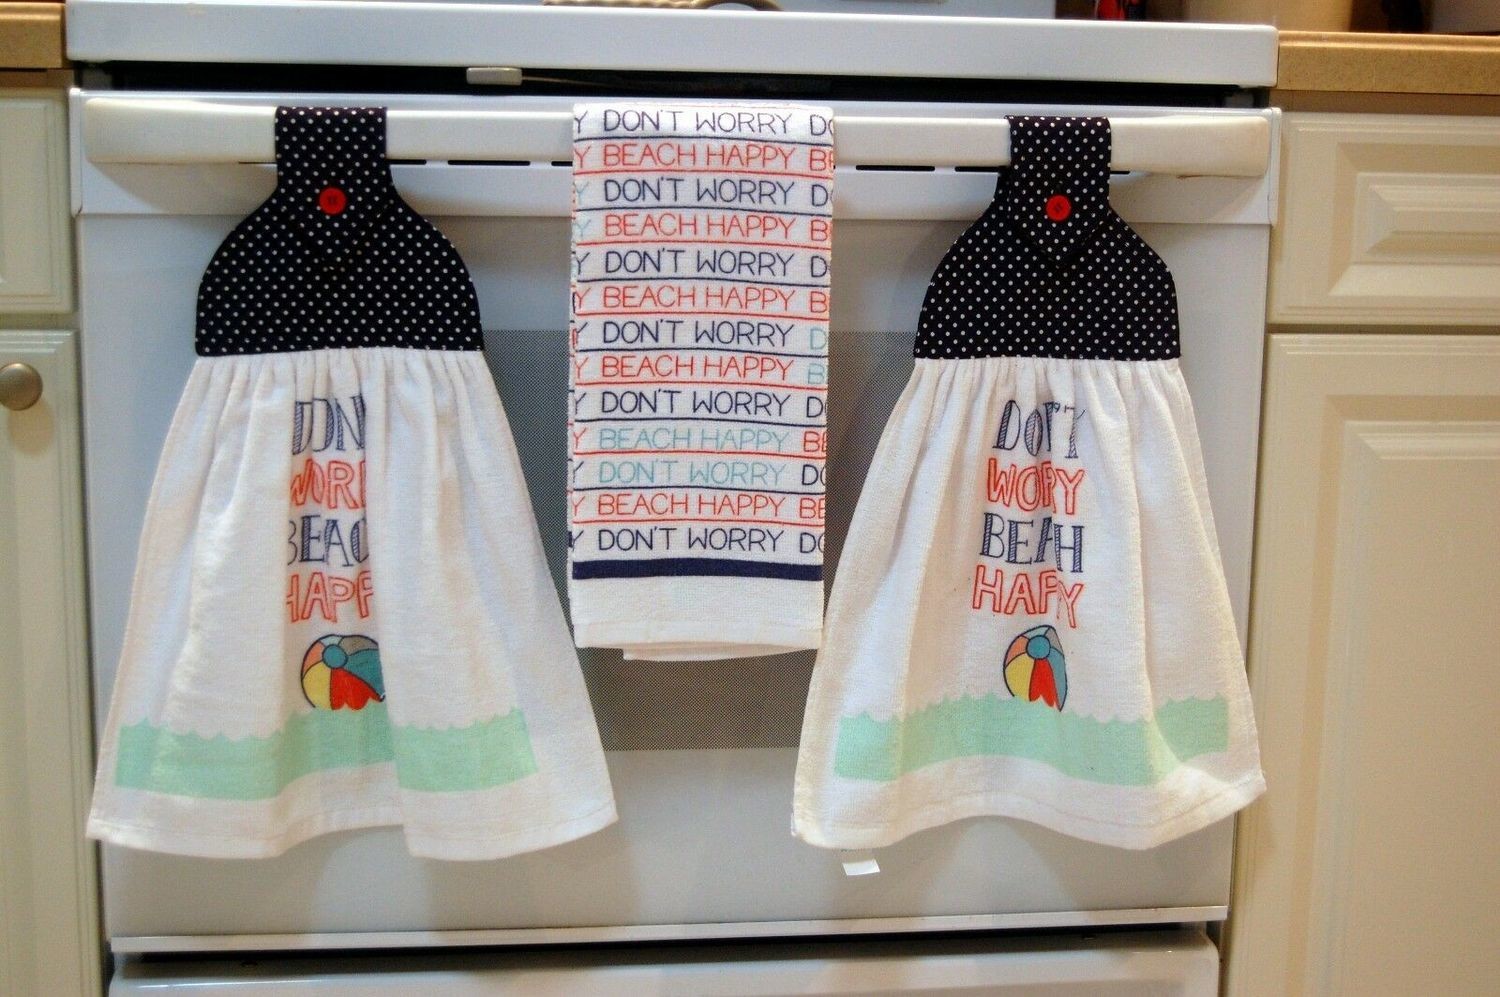 2 beautiful *Dont Worry Beach Happy* tie kitchen towels and one